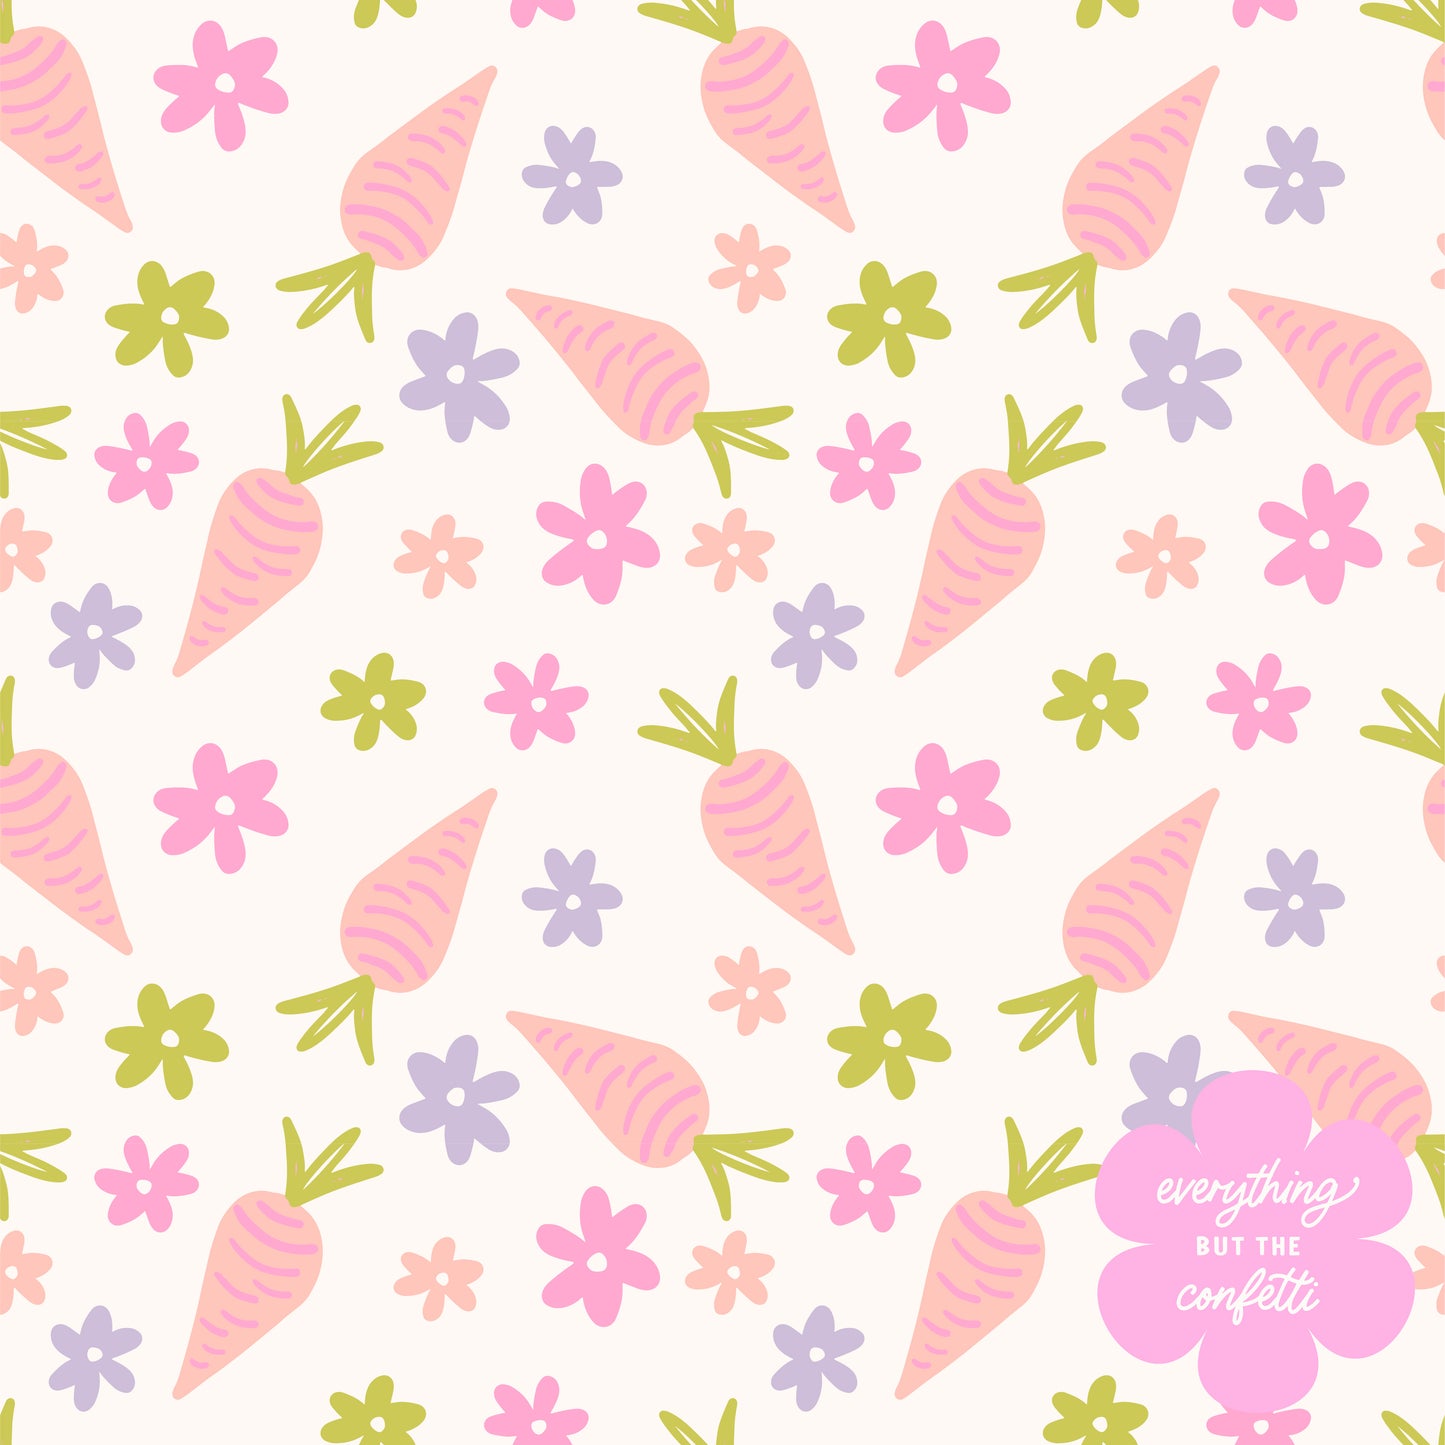 "Carrots and Blooms" Seamless Digital Pattern